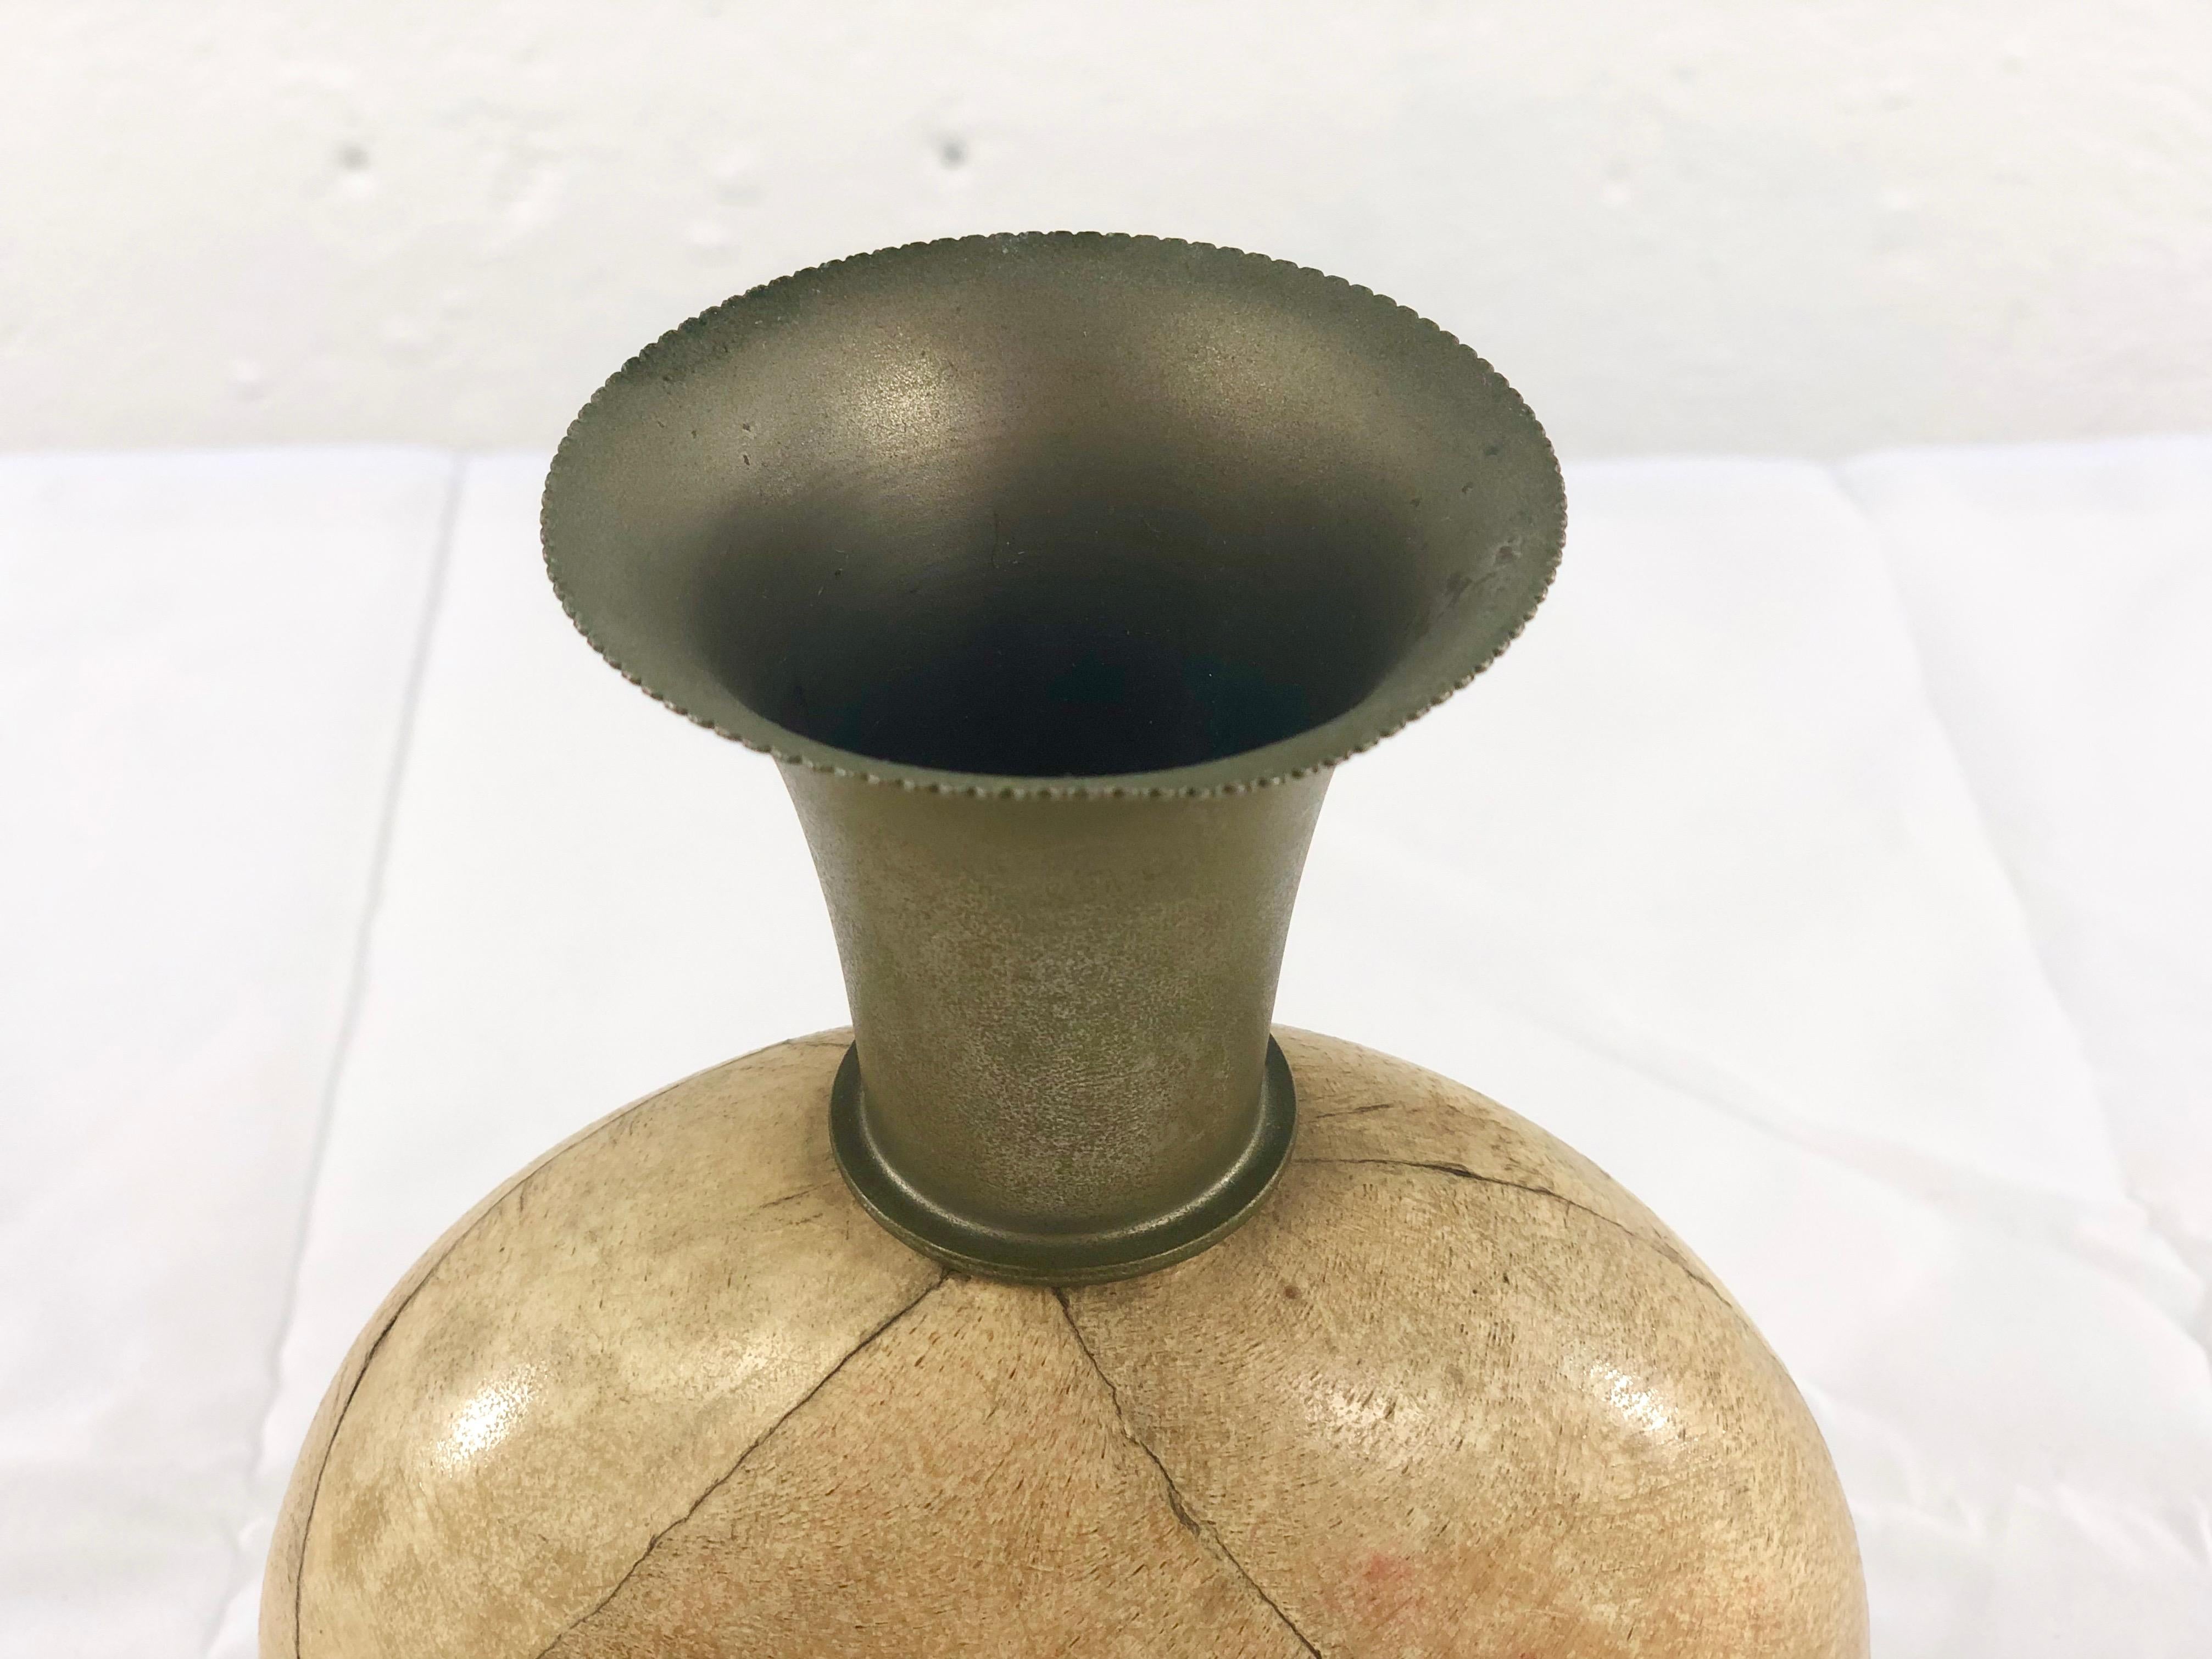 Gorgeous vintage vase in parchment made in the 50's of fine Italian craftsmanship.
The vase is composed of a central body, made of parchment decorated with geometric lines, and a neck made entirely of brass in patina.
The body of the vase has a